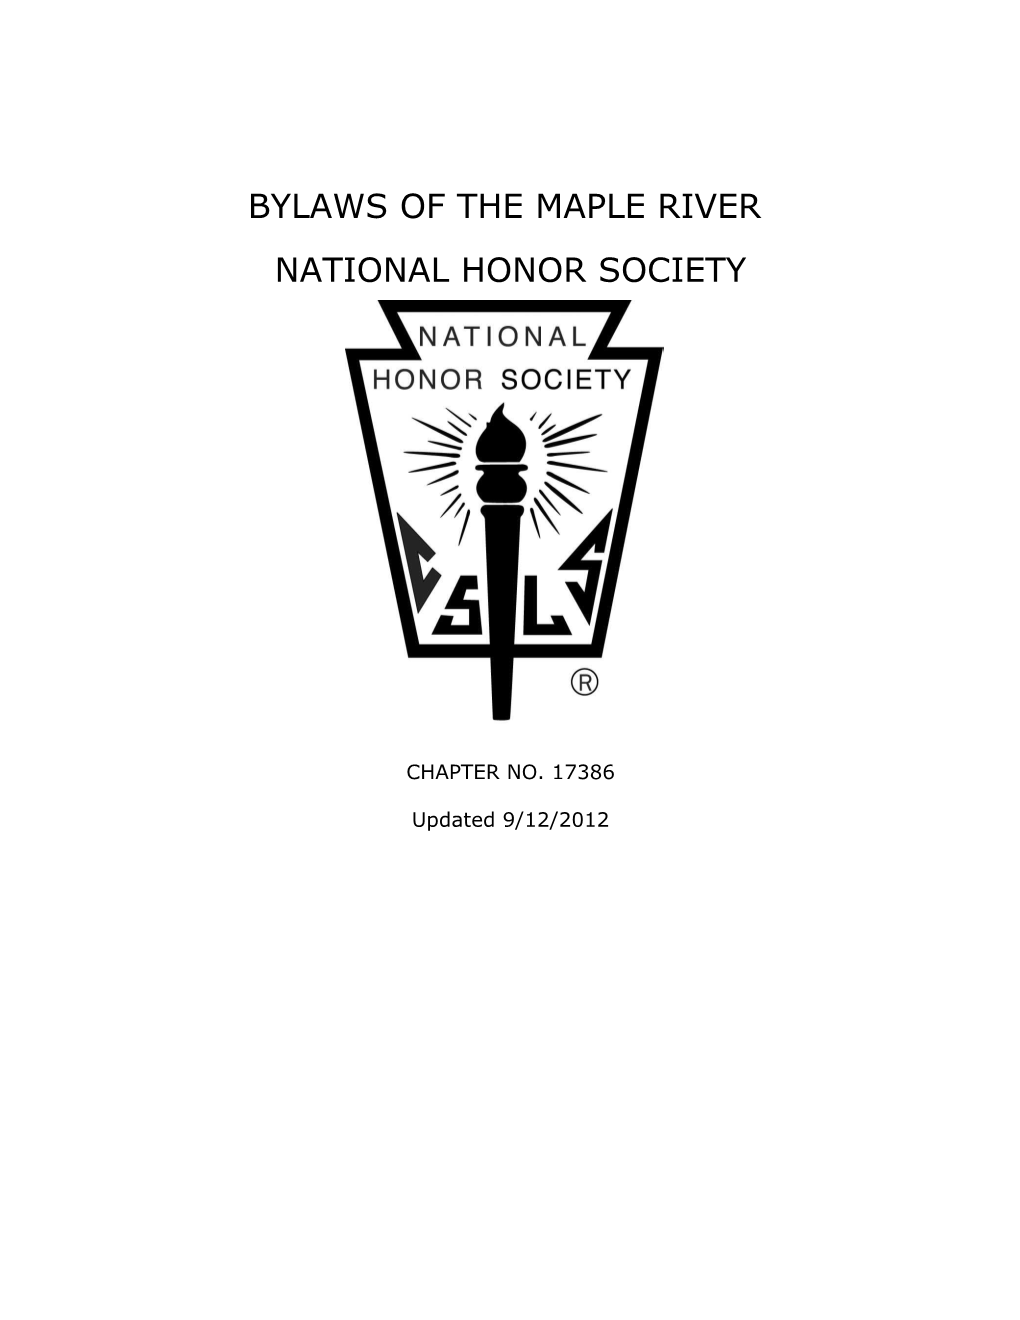 Bylaws of the Maple River